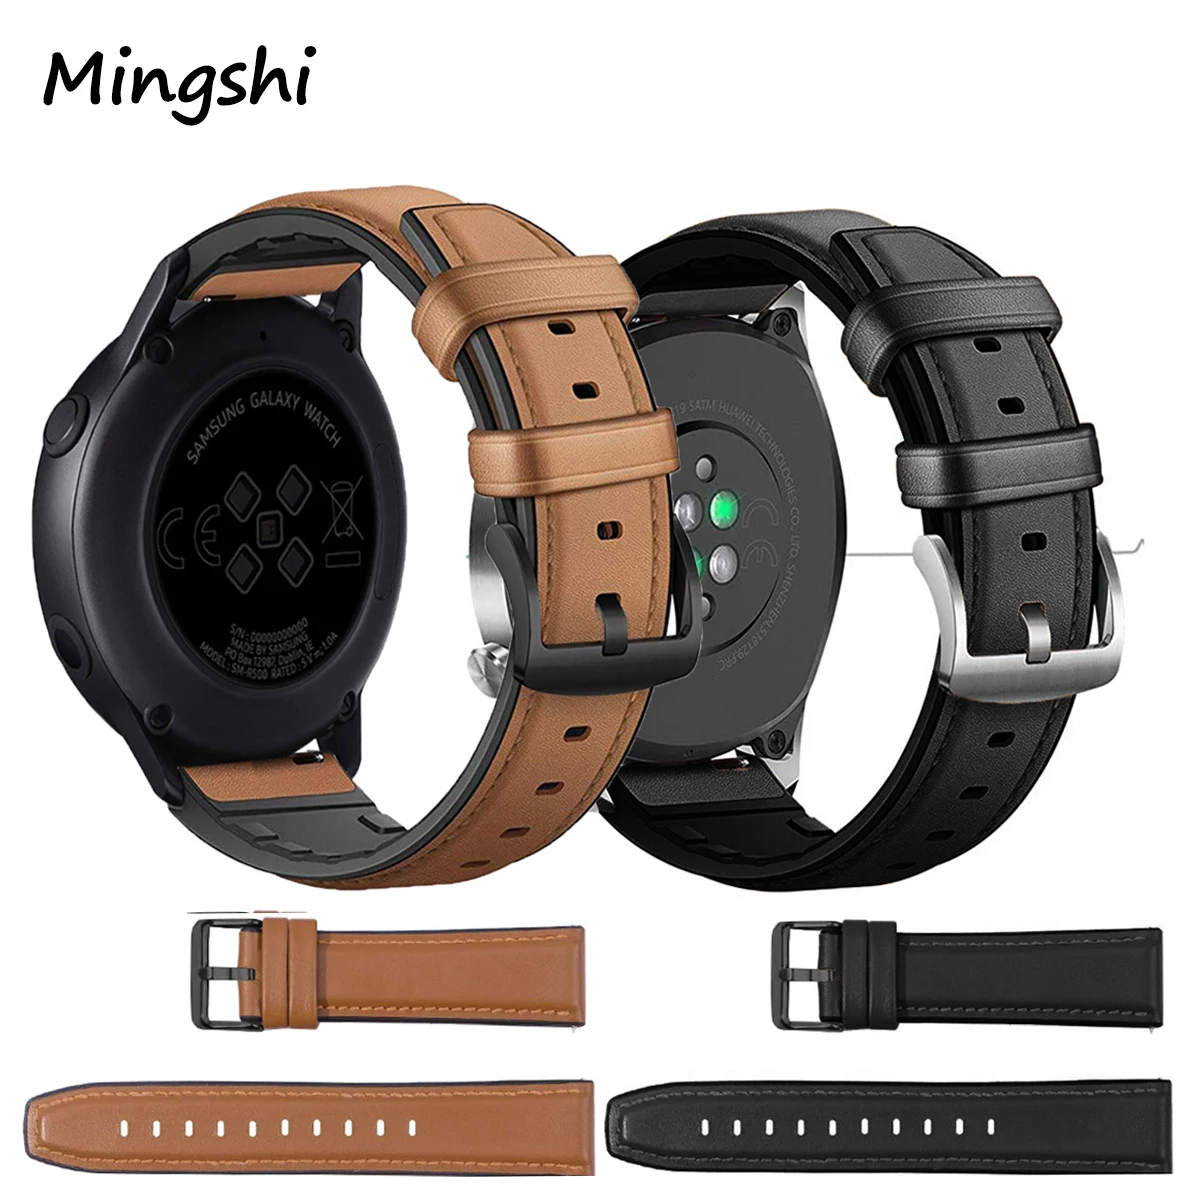 

Starp For Samsung Galaxy watch 46mm/42mm/active 2 gear S3 Frontier/huawei watch gt 2e/2/amazfit bip/gts strap 20/22mm watch band